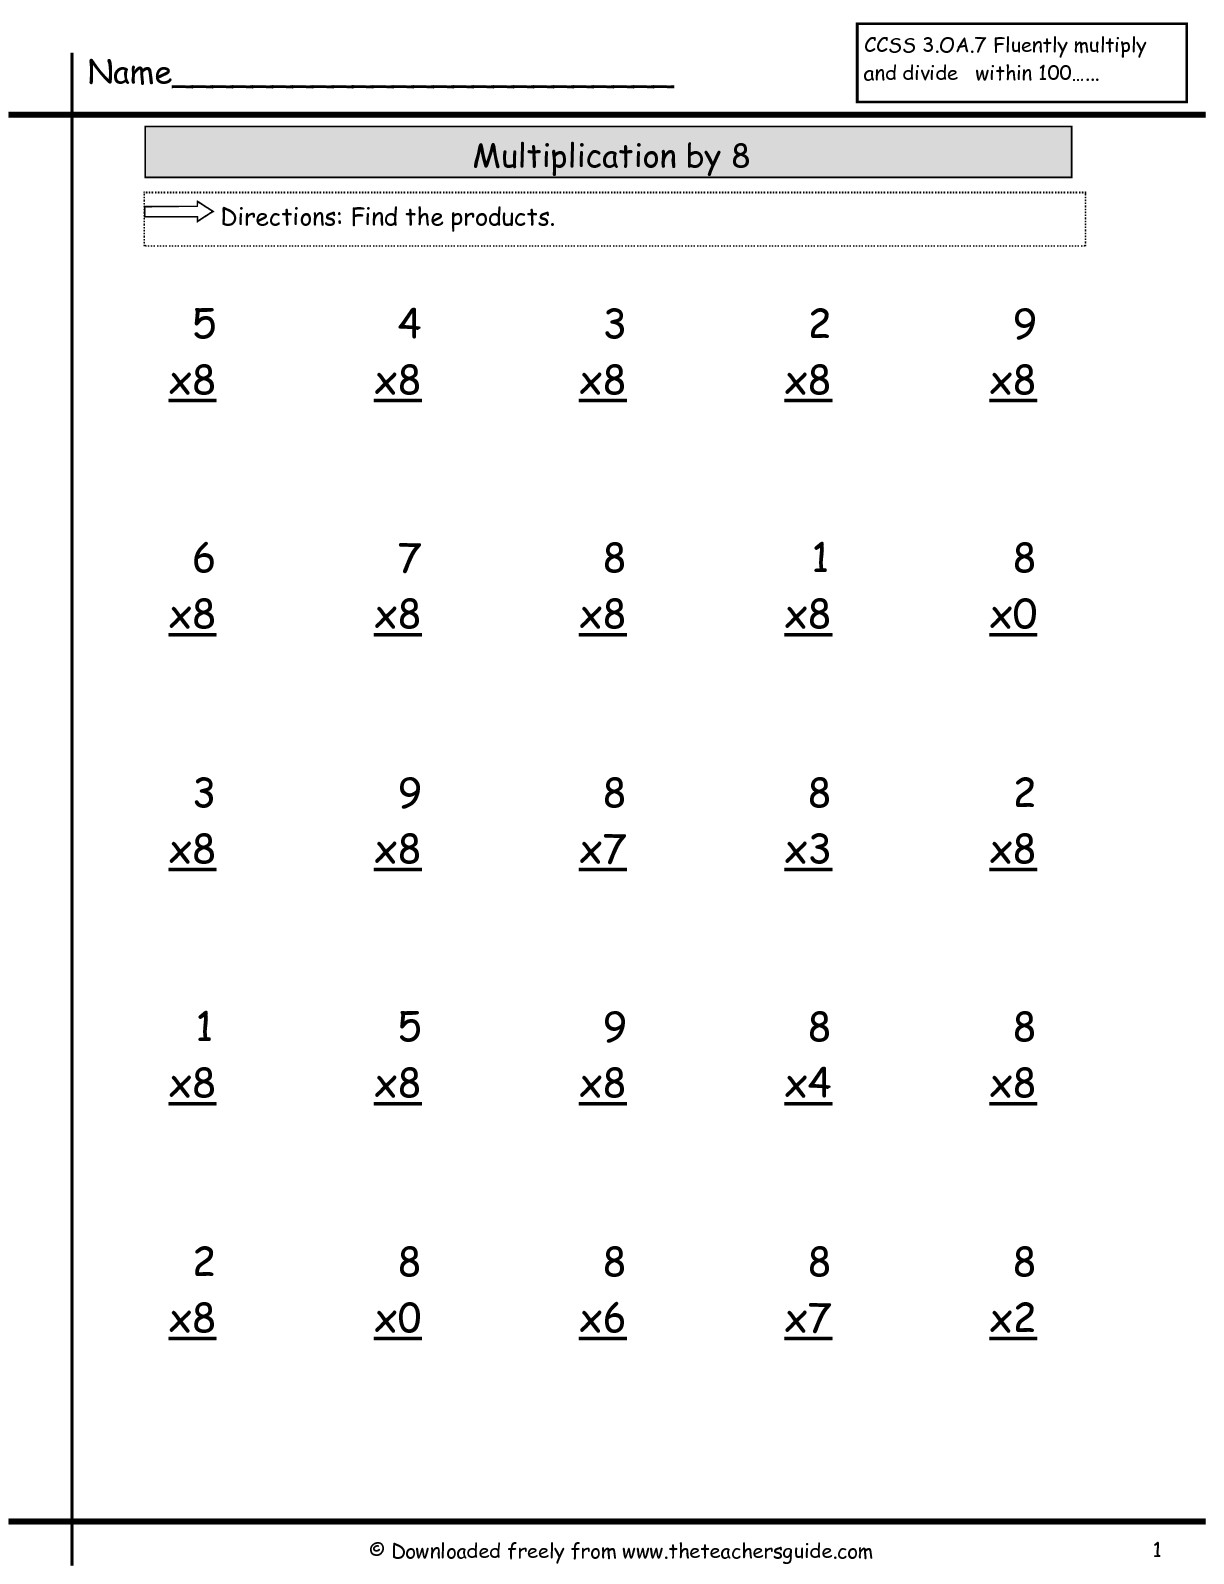 Multiplication Facts Worksheets From The Teacher&amp;#039;s Guide inside Multiplication Worksheets Zero And Ones